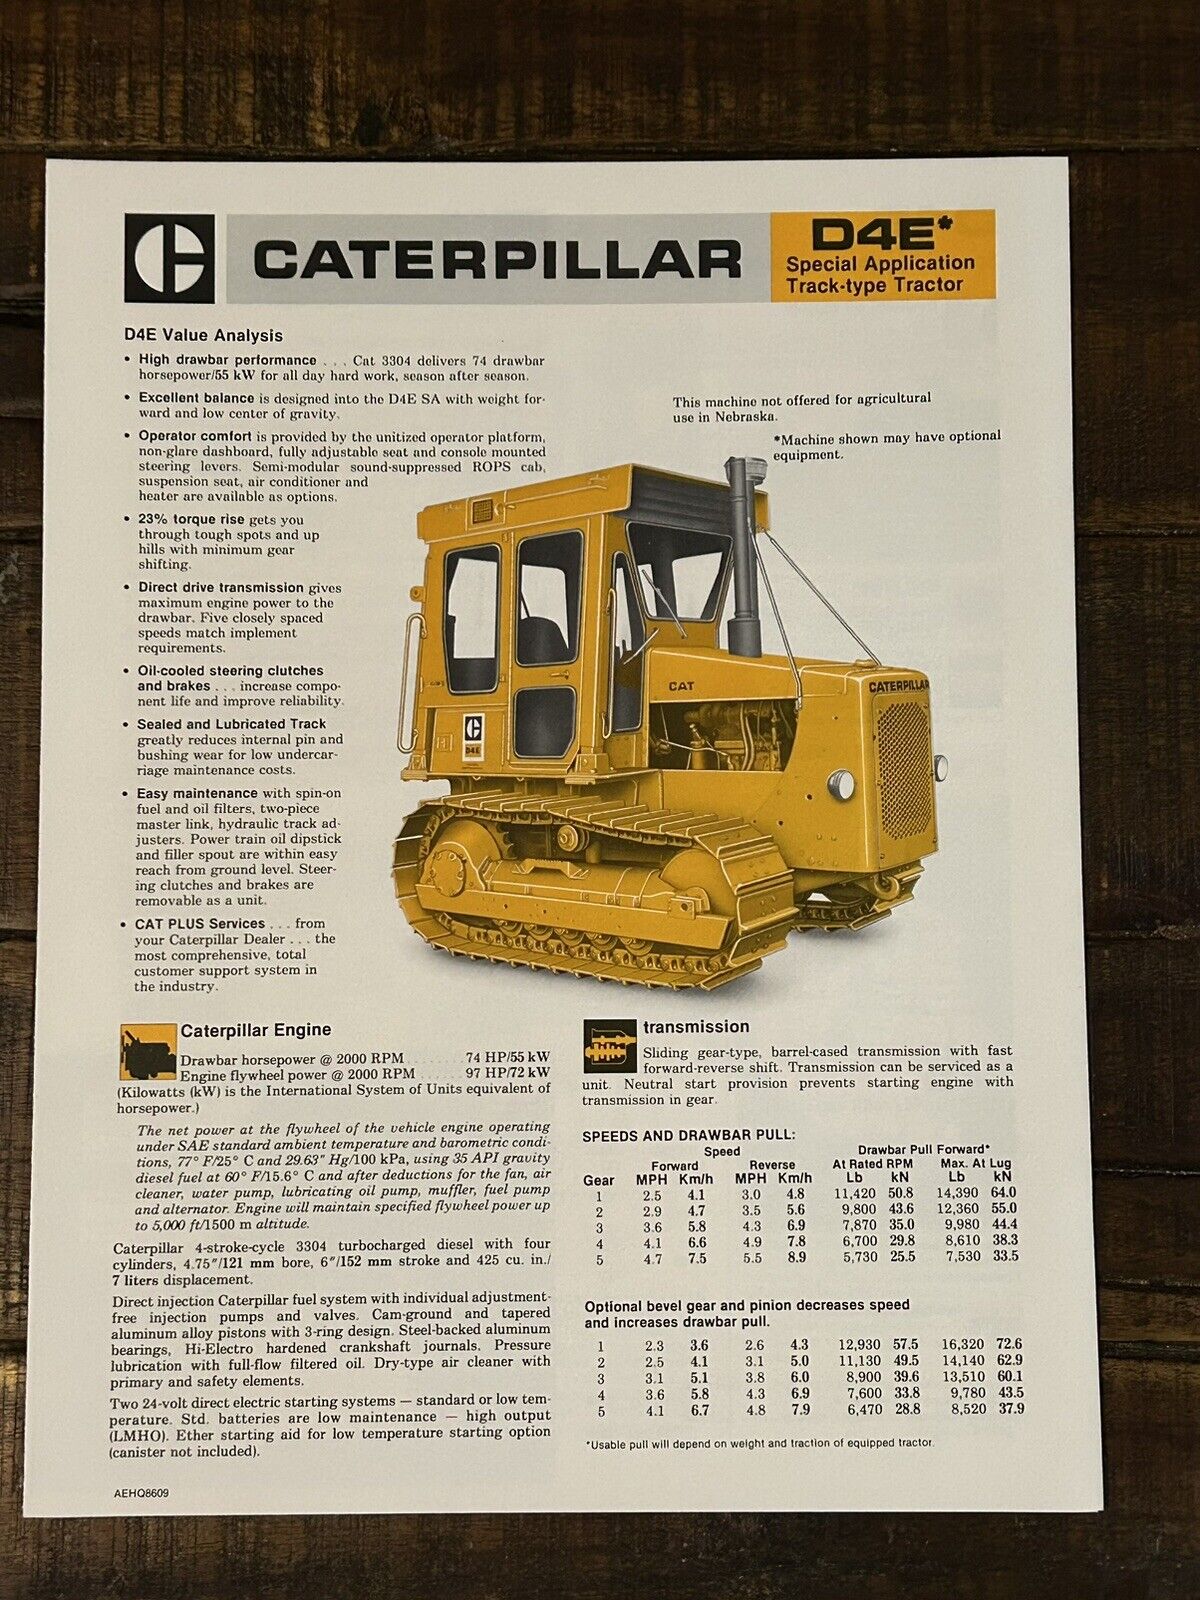 Caterpillar D4E Special Application Track-Type Tractor Brochure 1982